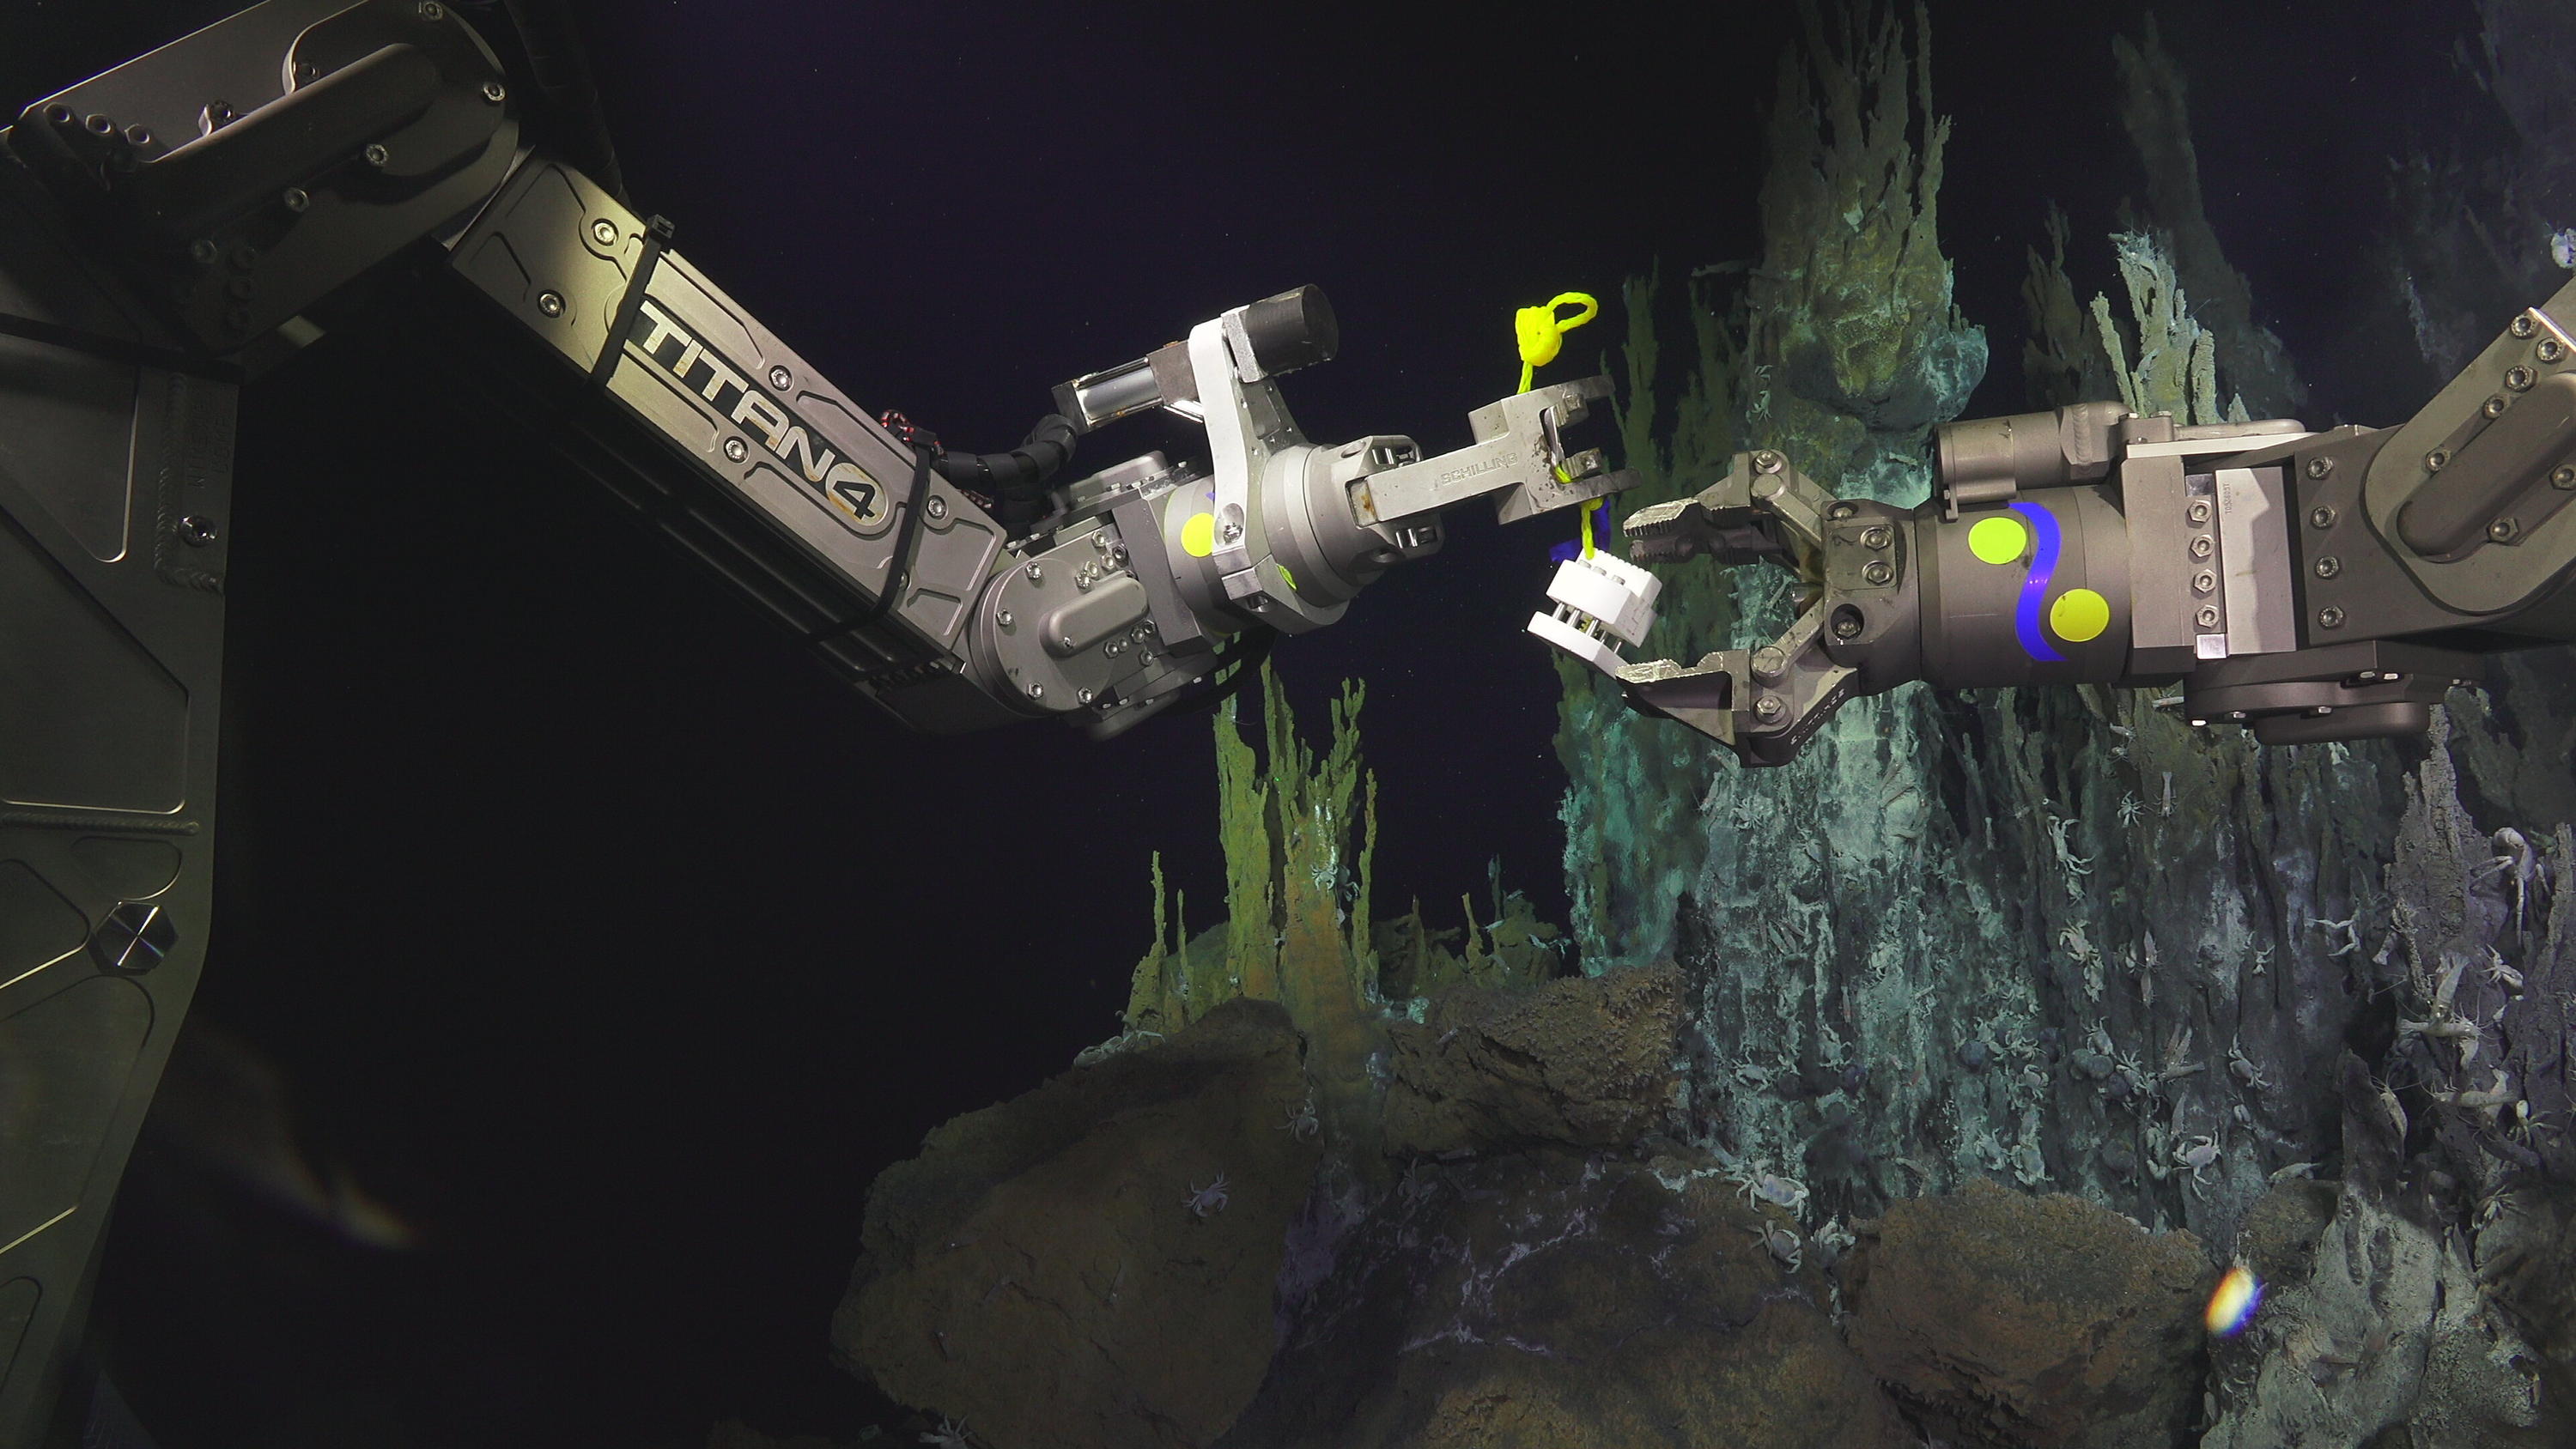 Remote Operating Vehicle arms holding a cube shaped sampling instrument. Background has blue hudrothermal vents covered in small crabs